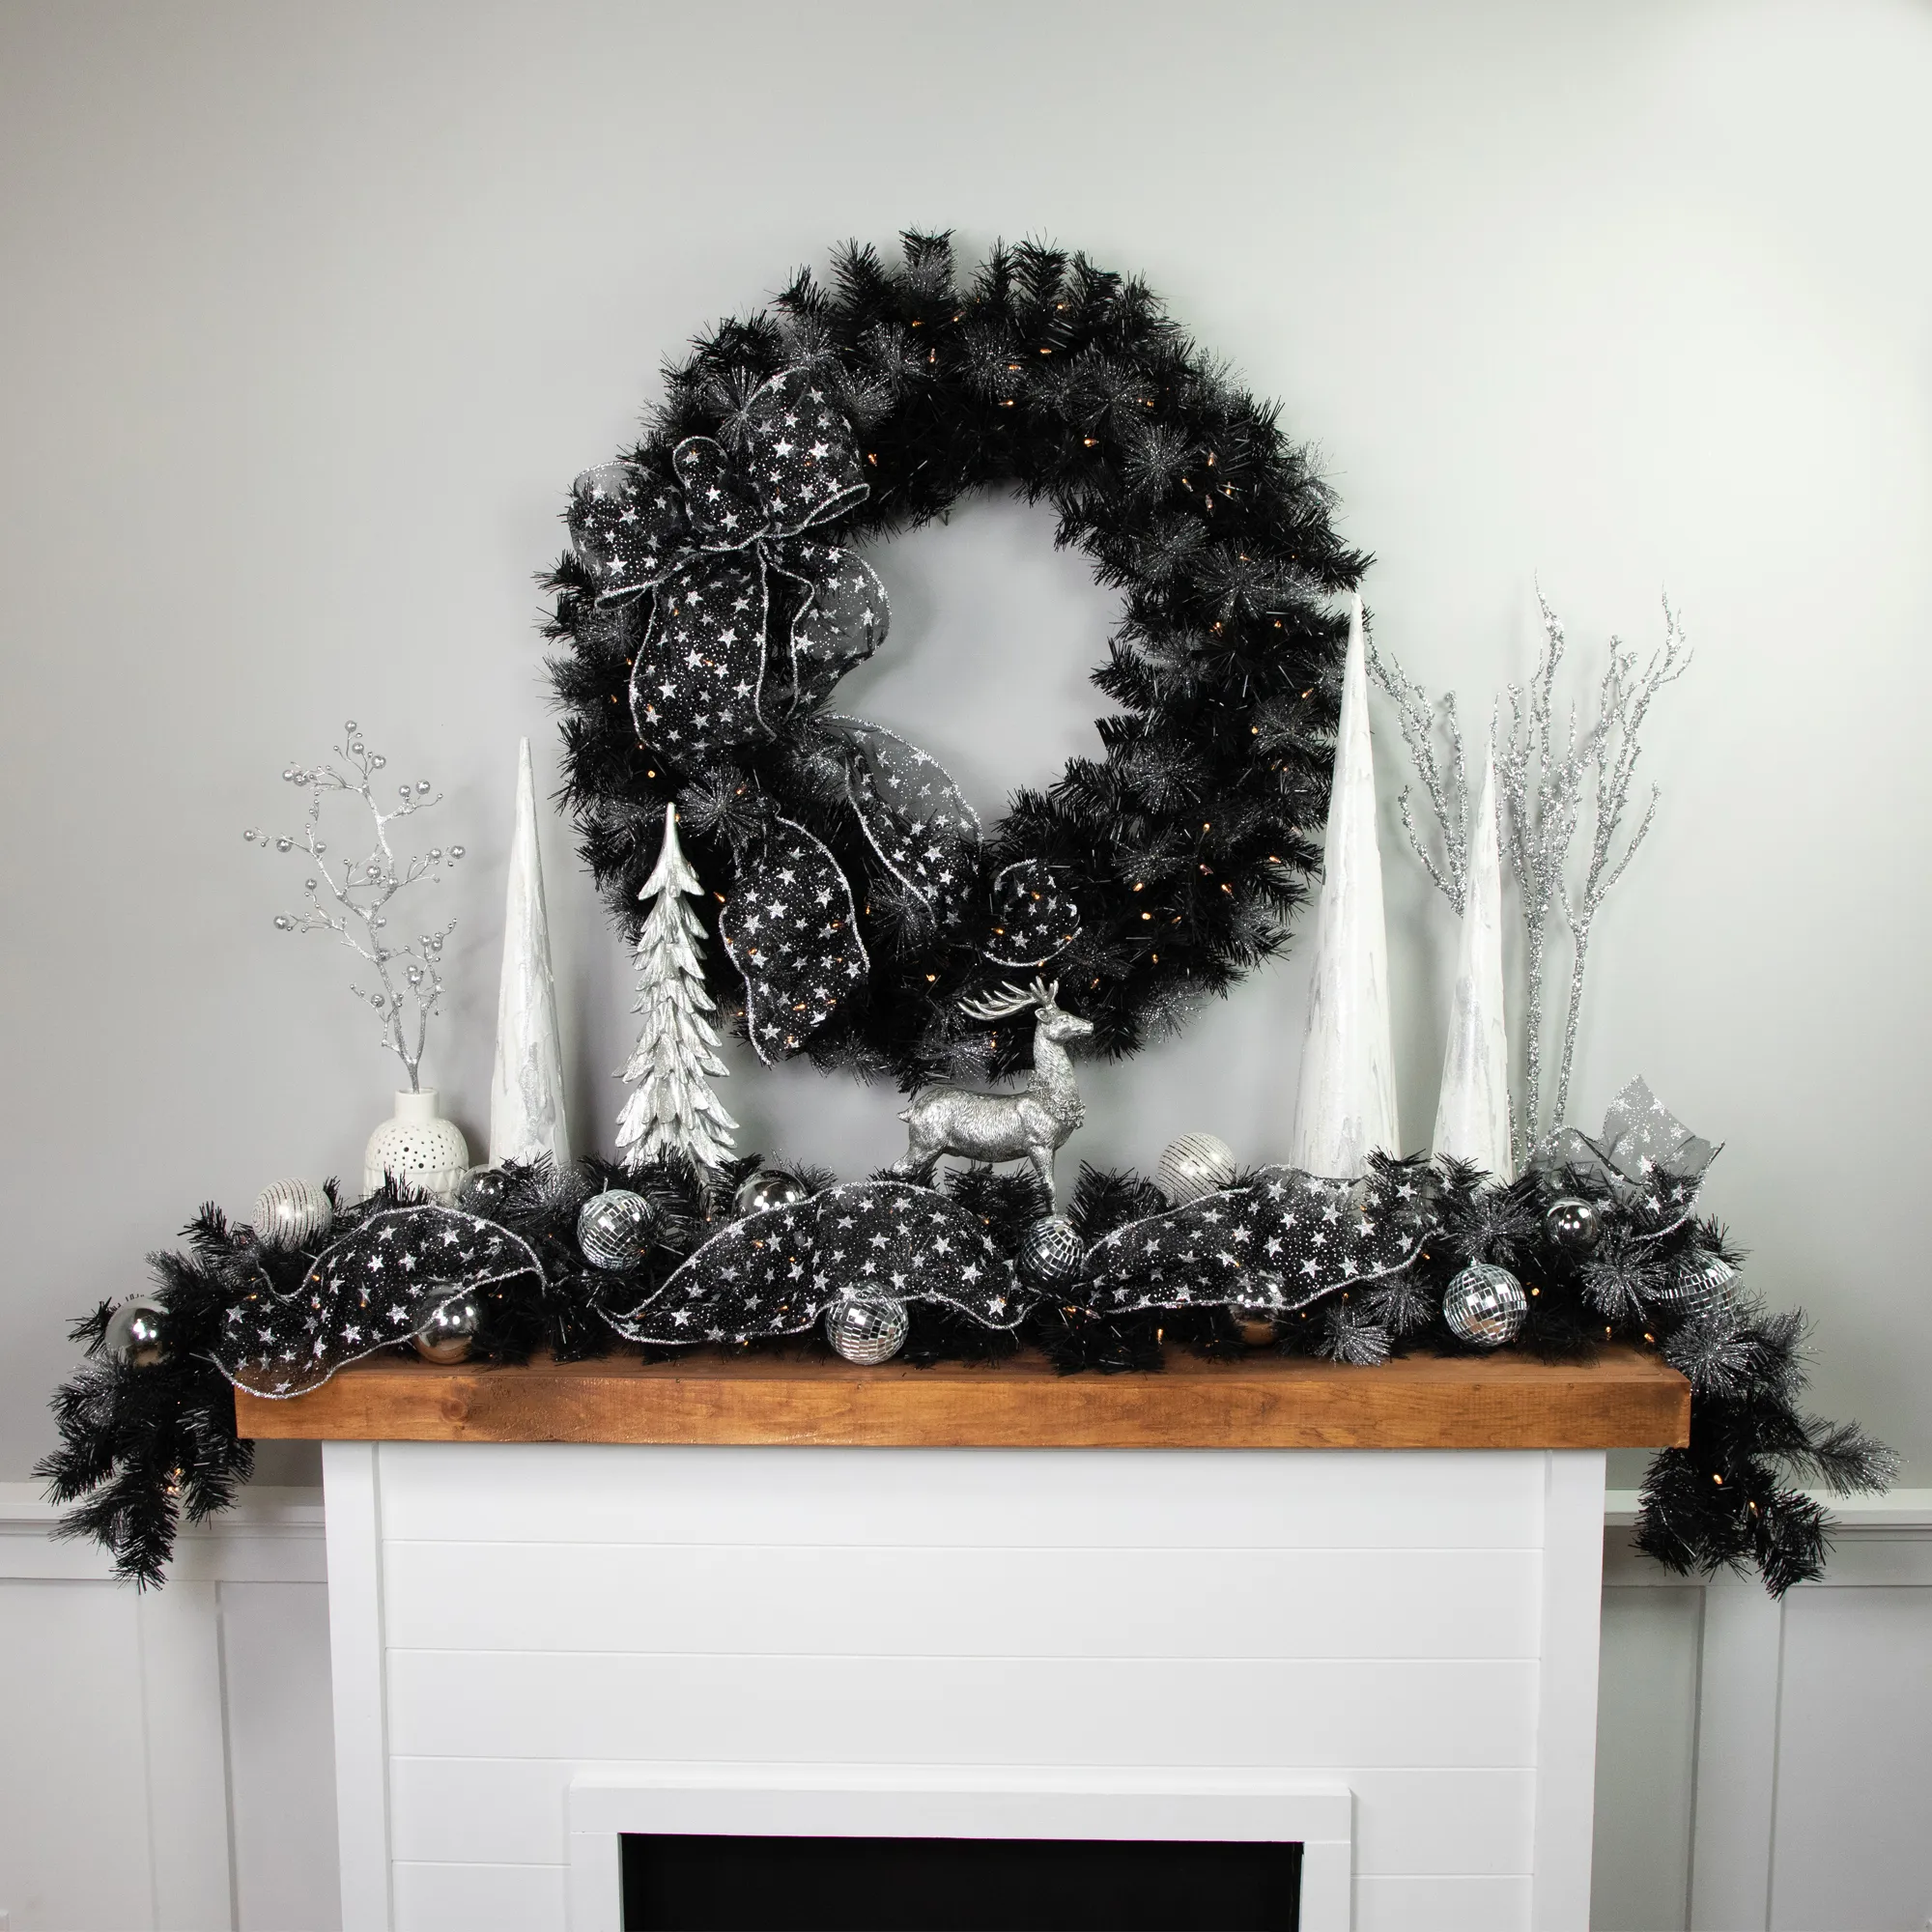 Black Bristle Artificial Christmas Wreath- 36 inches  Warm White LED Lights